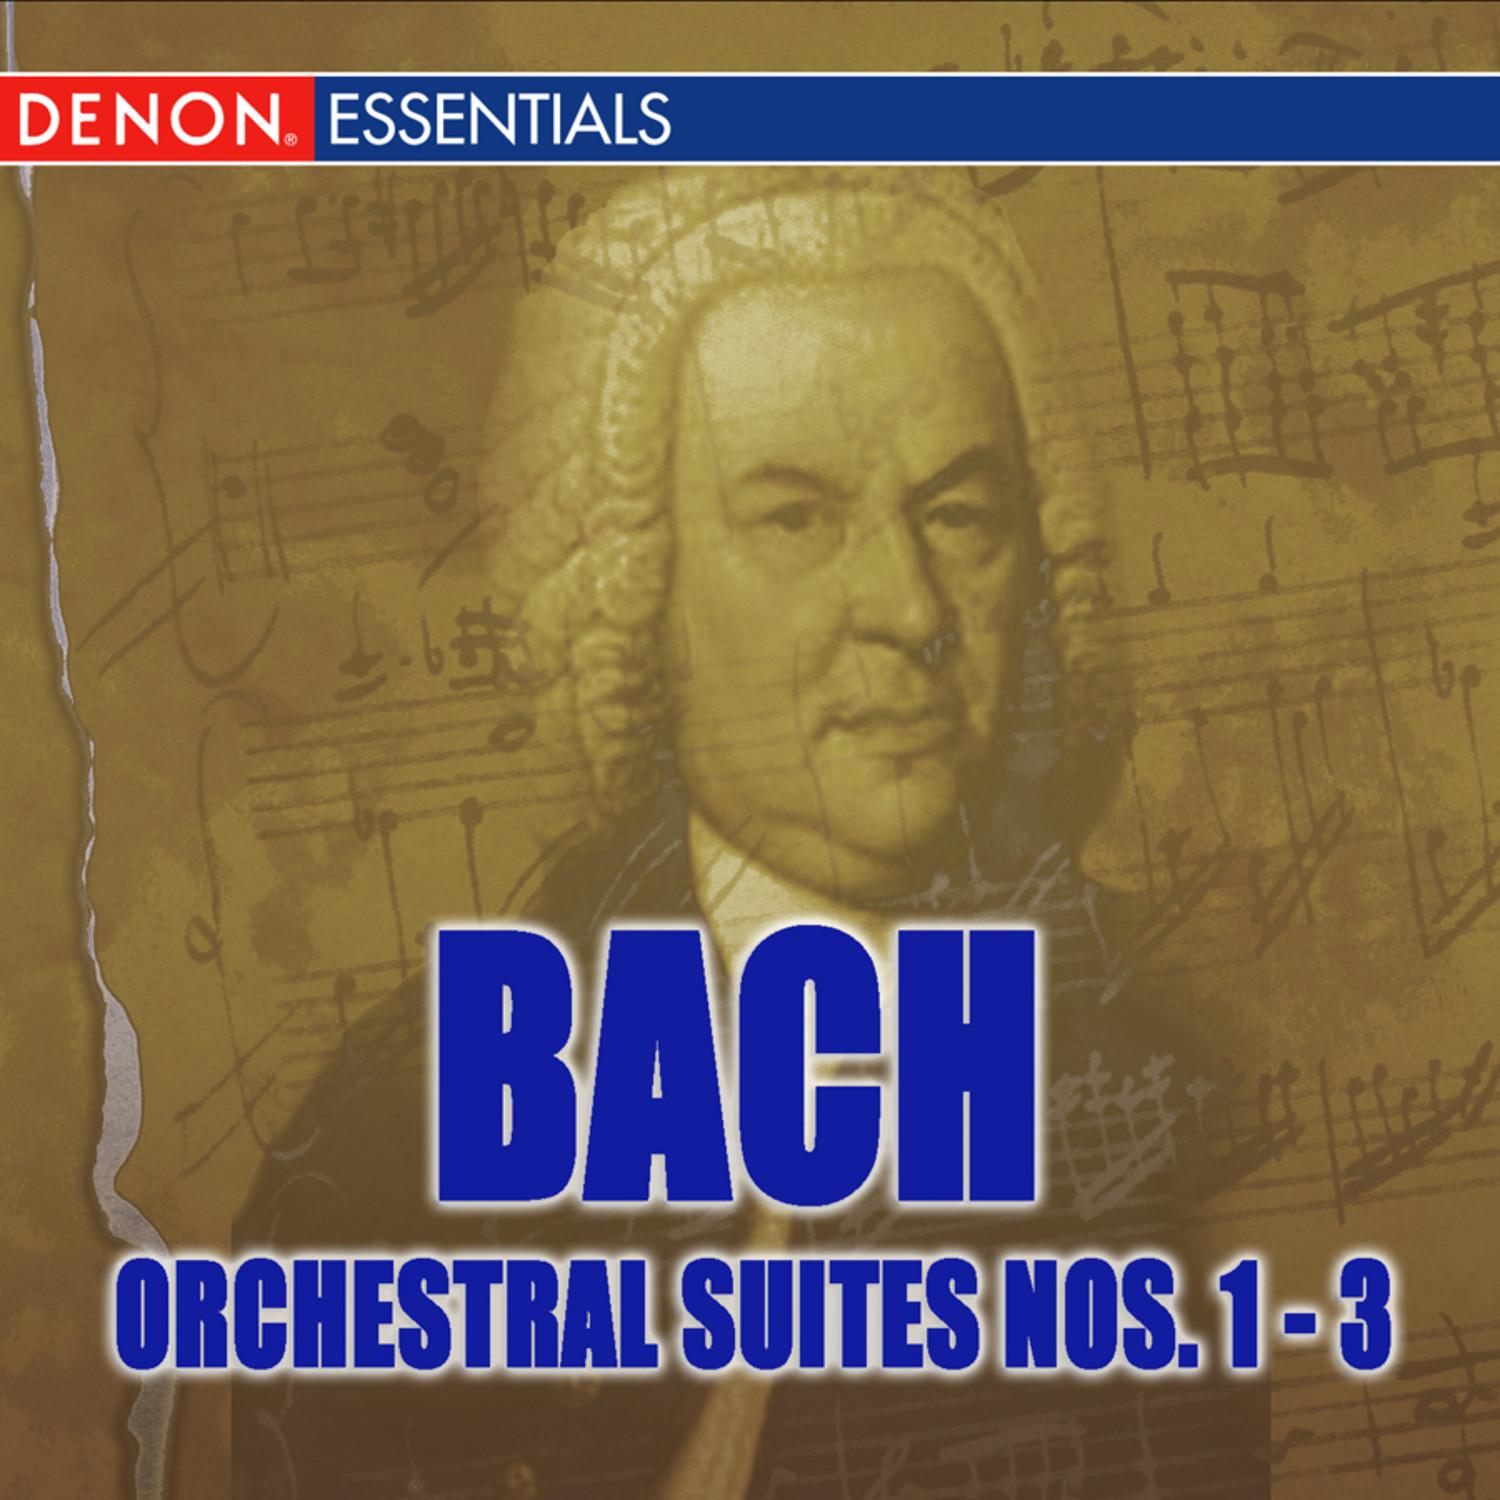 Suite for Orchestra No. 3 in D Major, BWV 1068: III. Gavottes 1 & 2